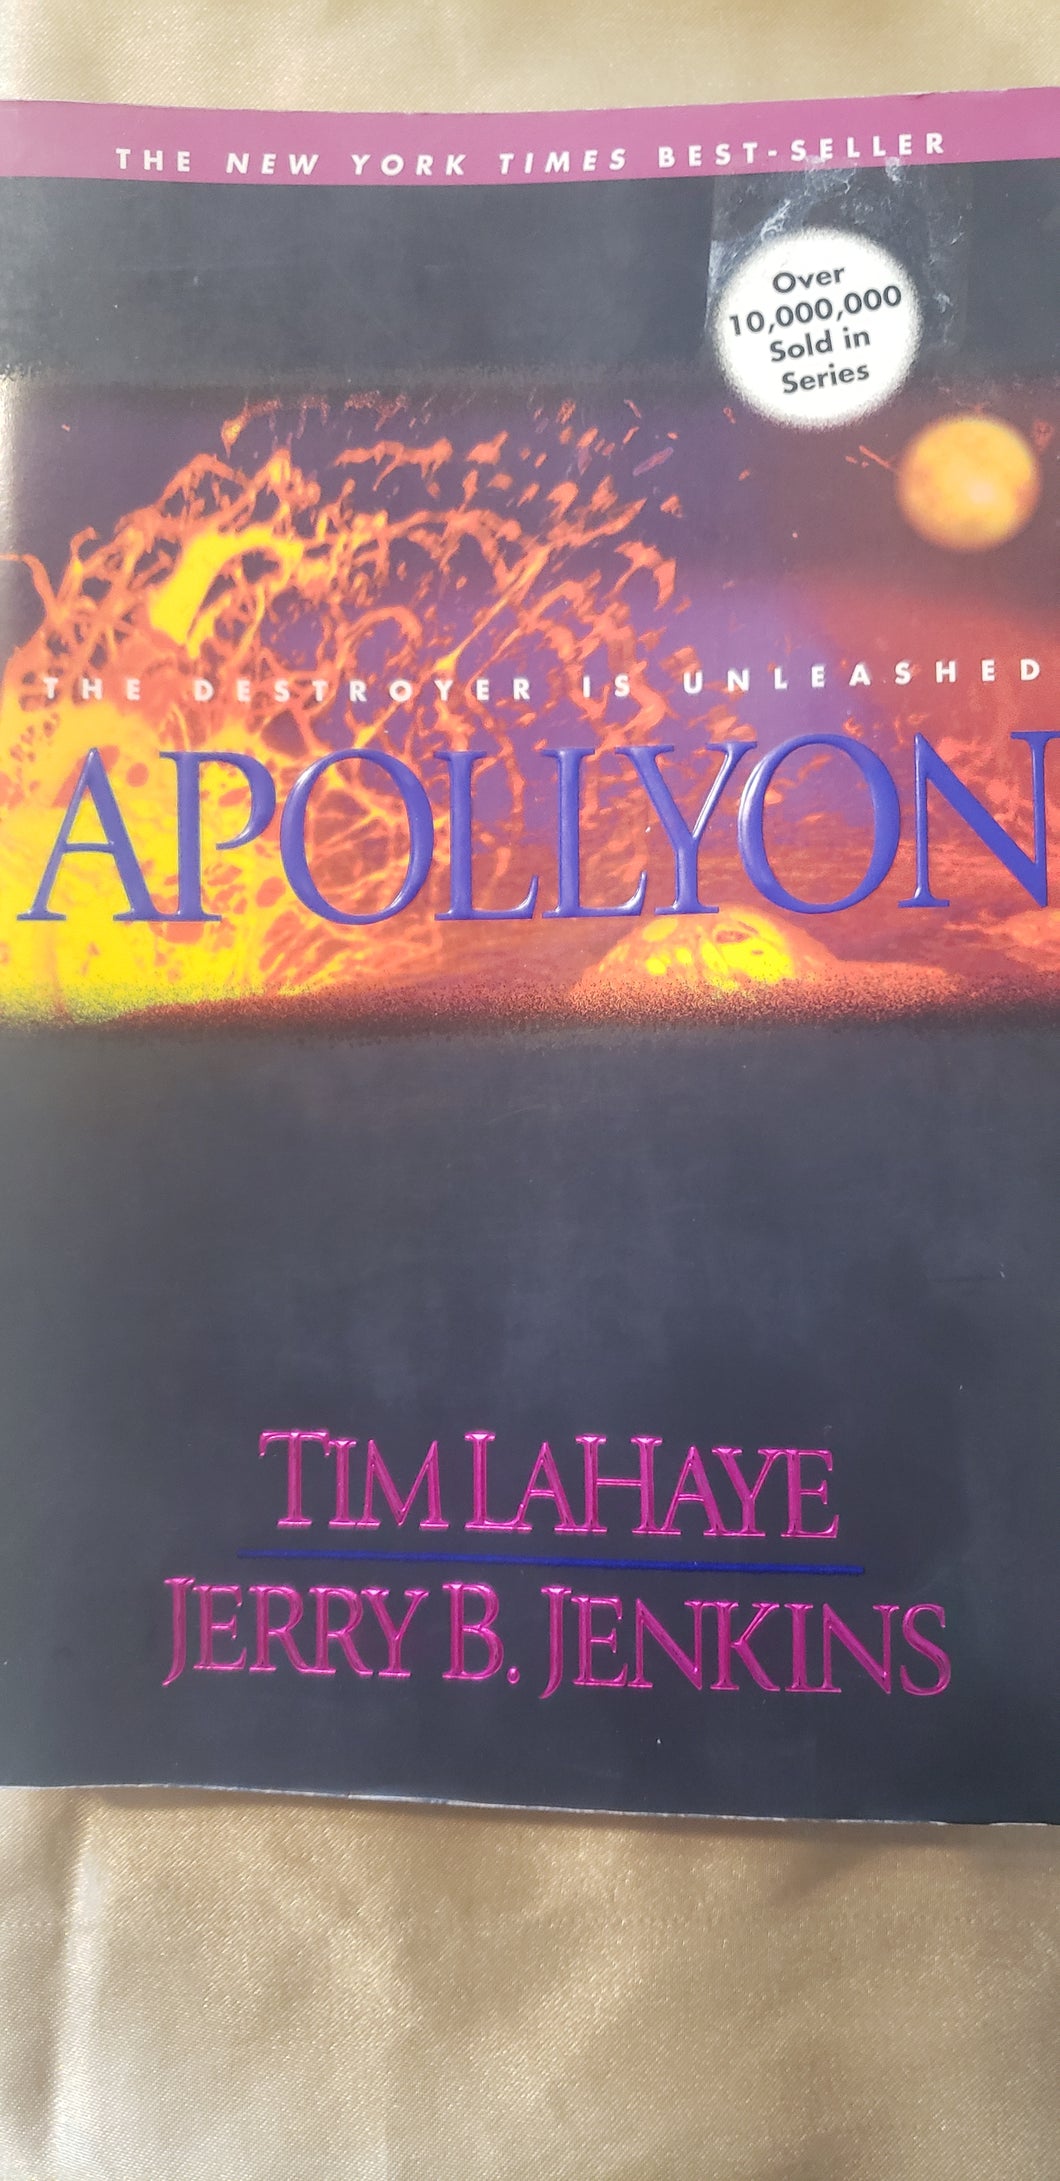 Apollyon The Destroyer is Unleashed by Tim LaHaye and Jerry B. Jenkins